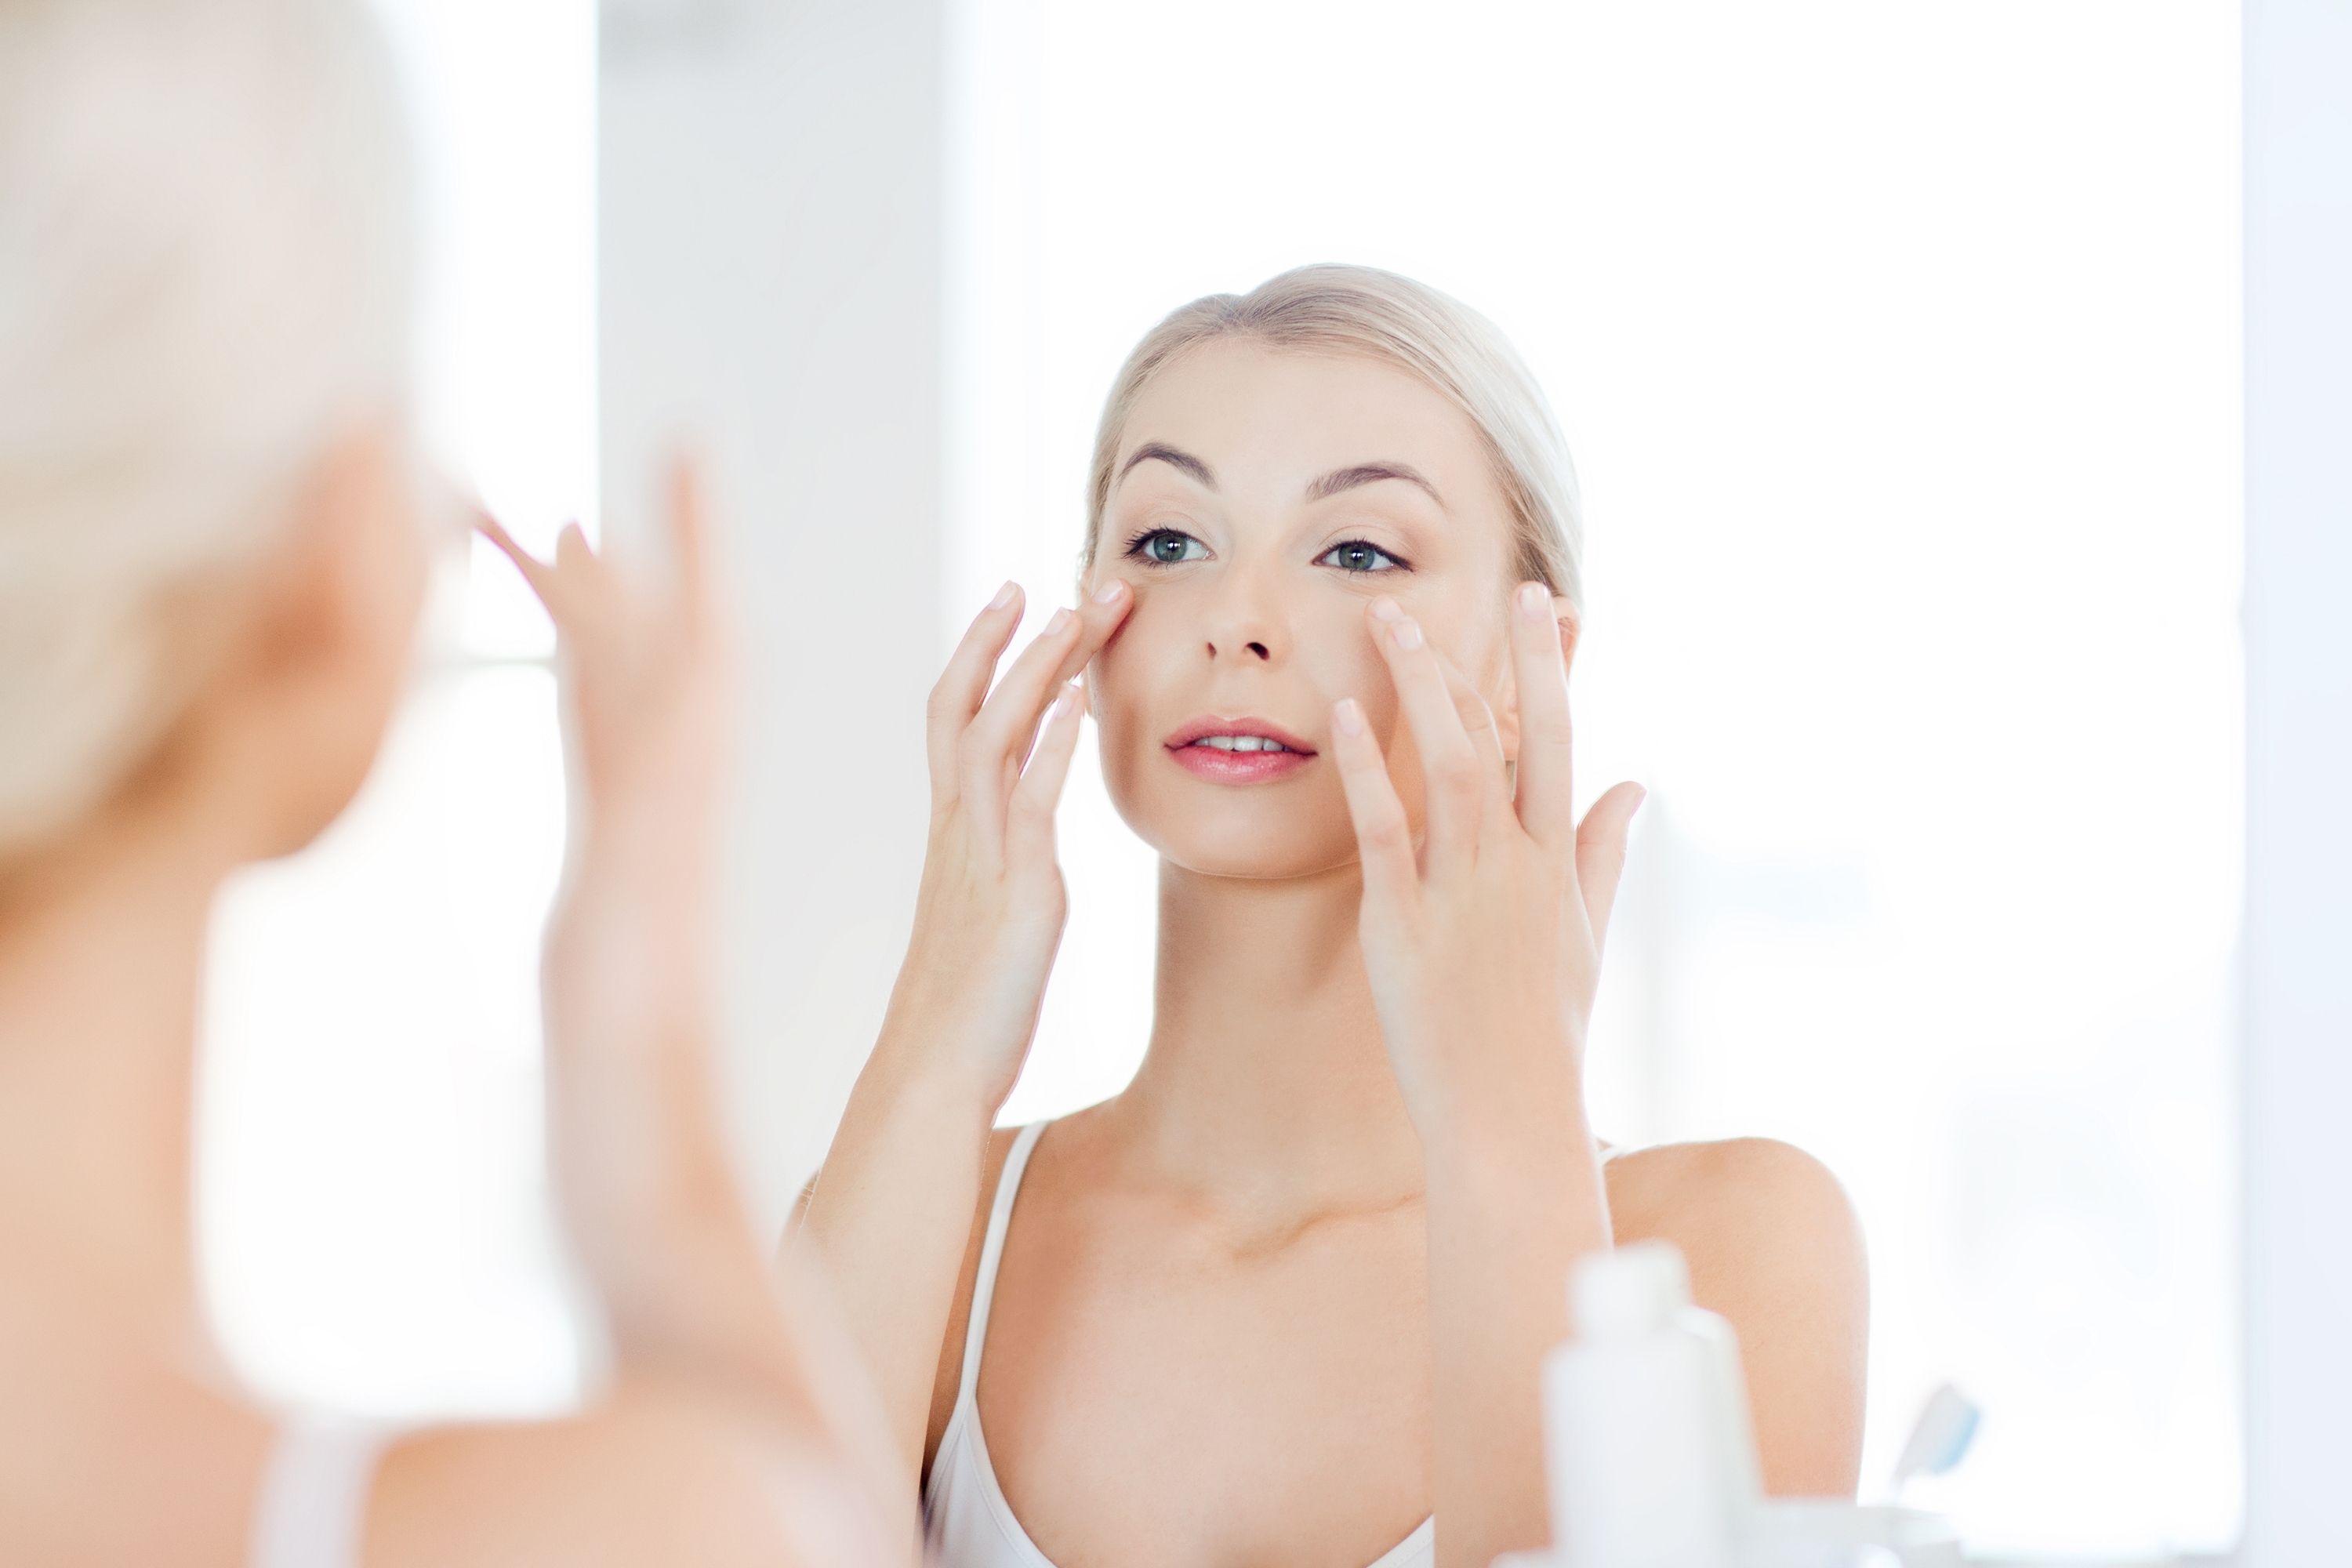 Useful tips for skin care around the eyes